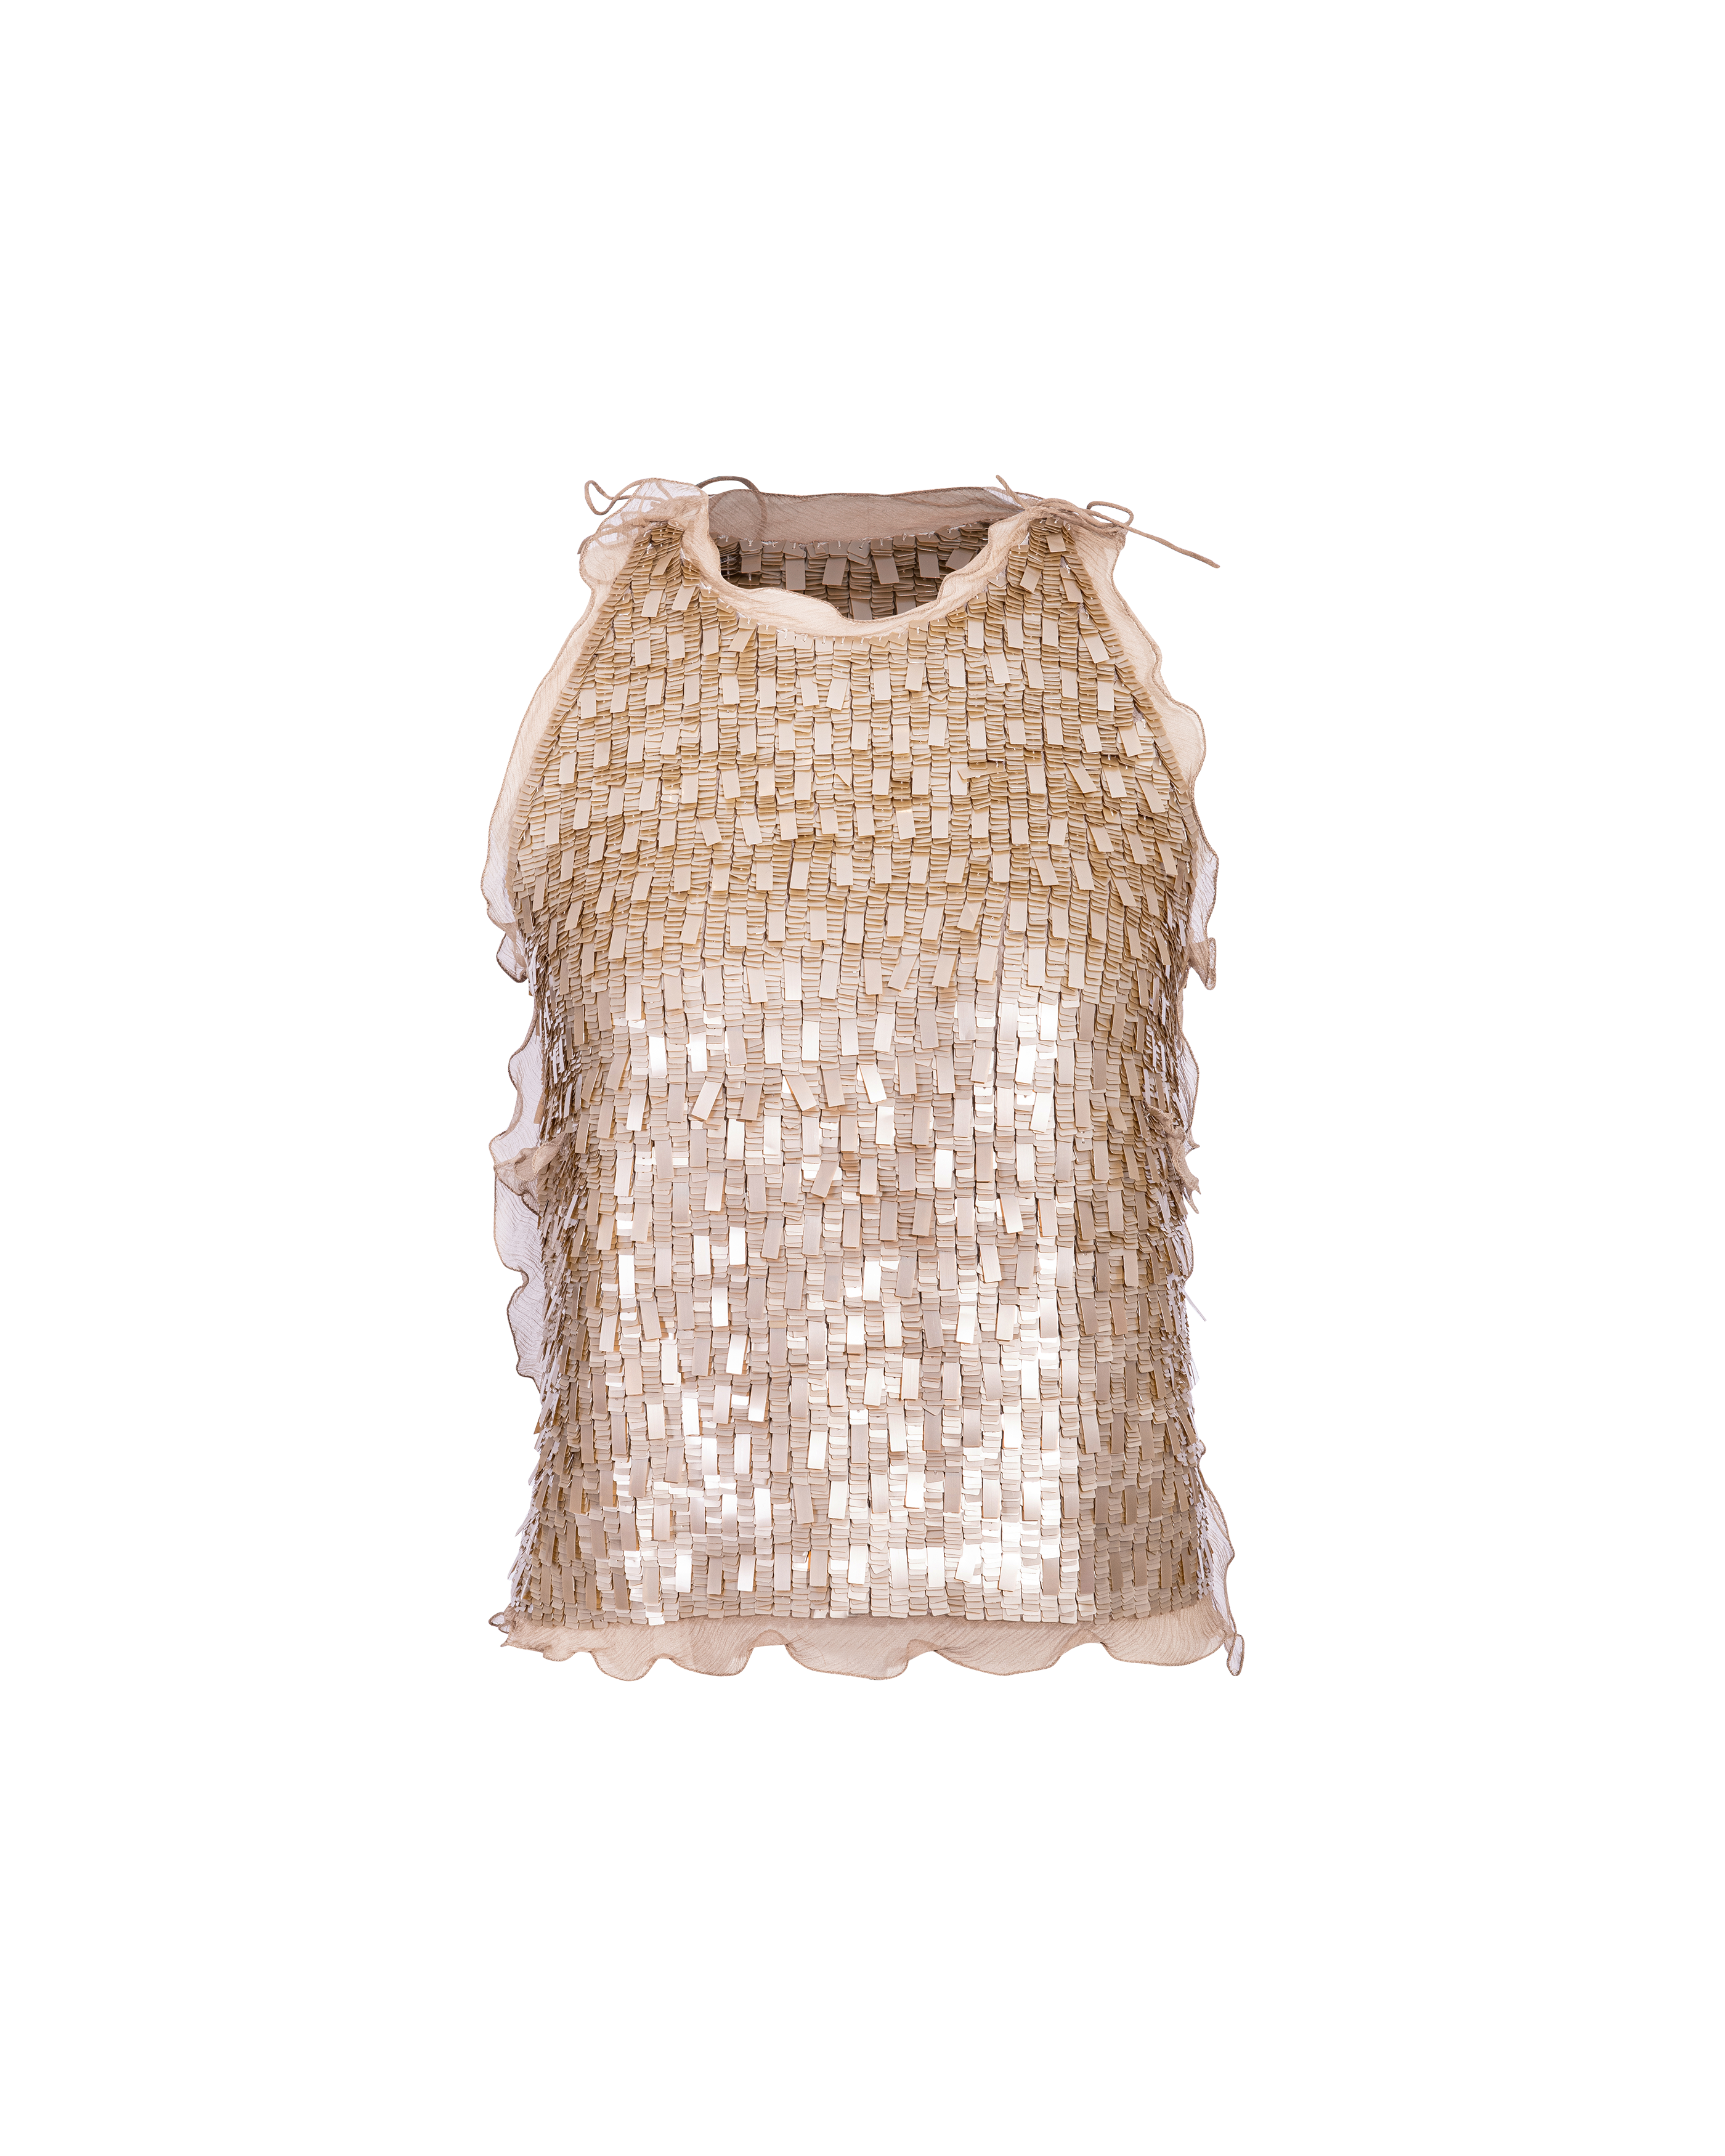 S/S 2000 Brown Embellished Tank Top